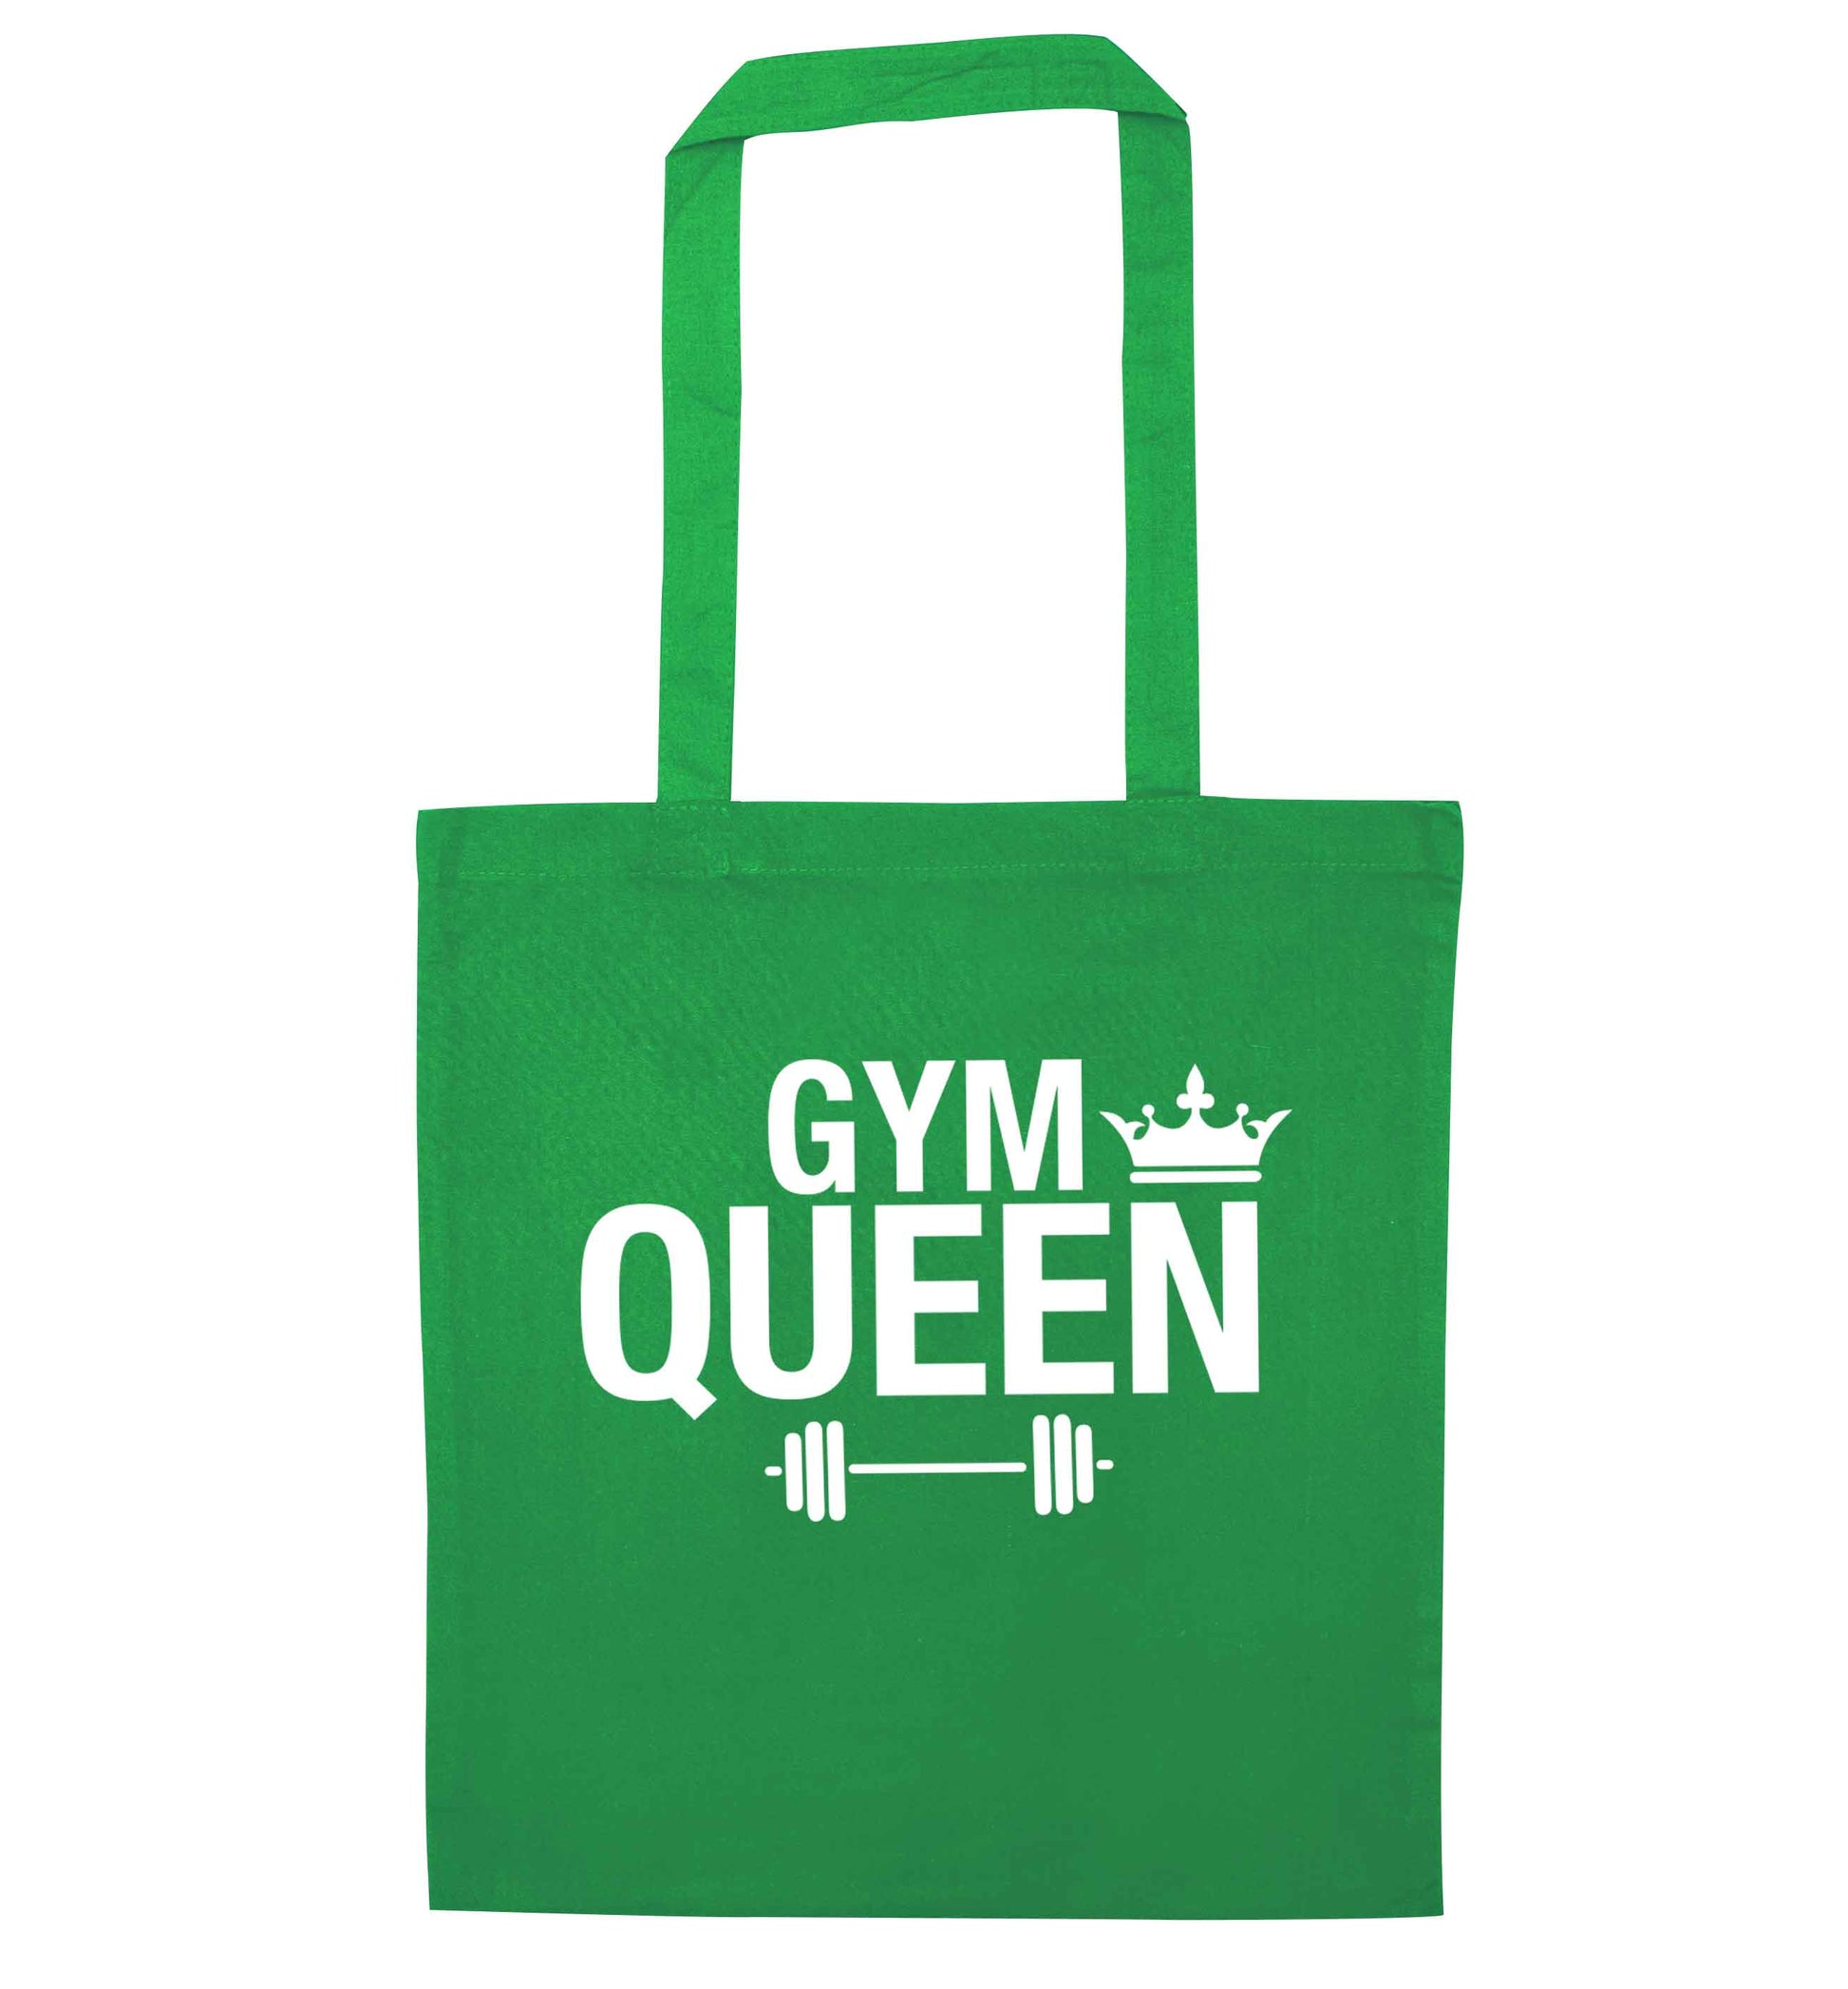 Gym queen green tote bag